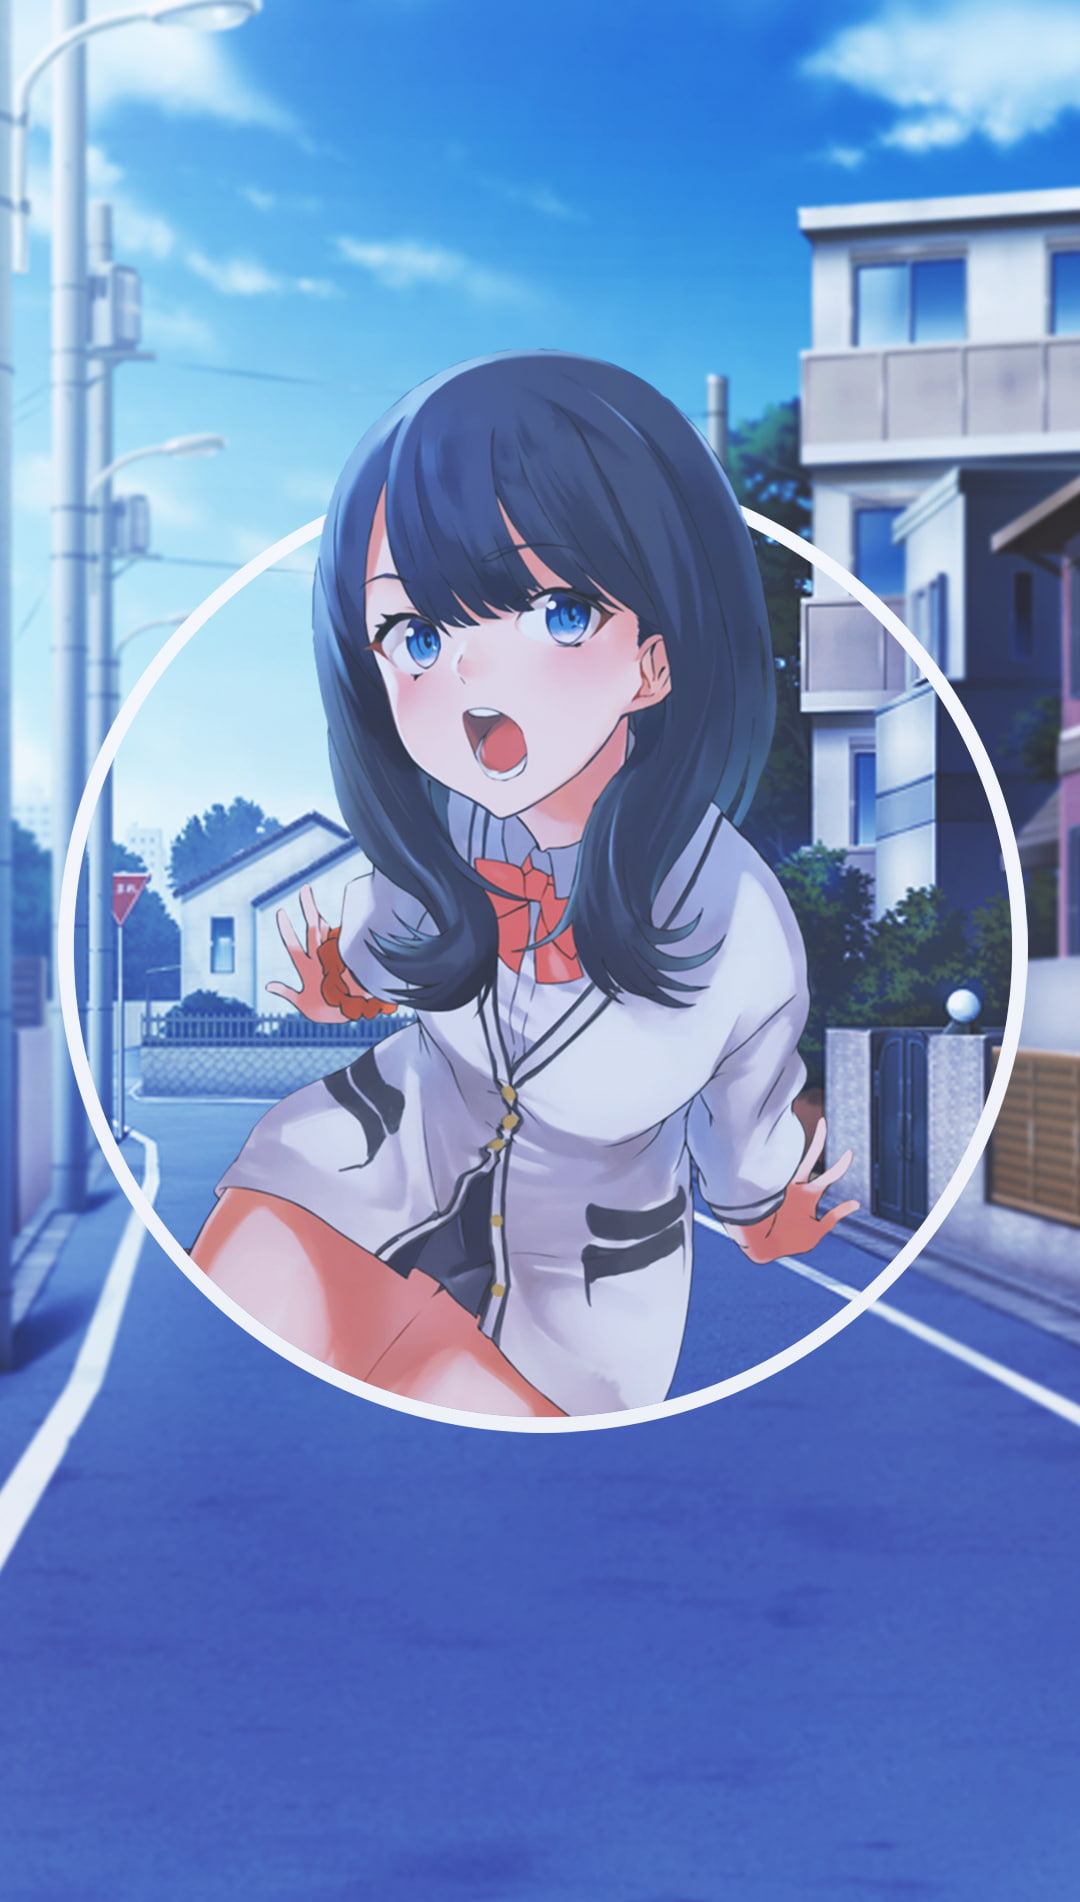 anime, anime girls, picture-in-picture, open mouth, urban, blue eyes